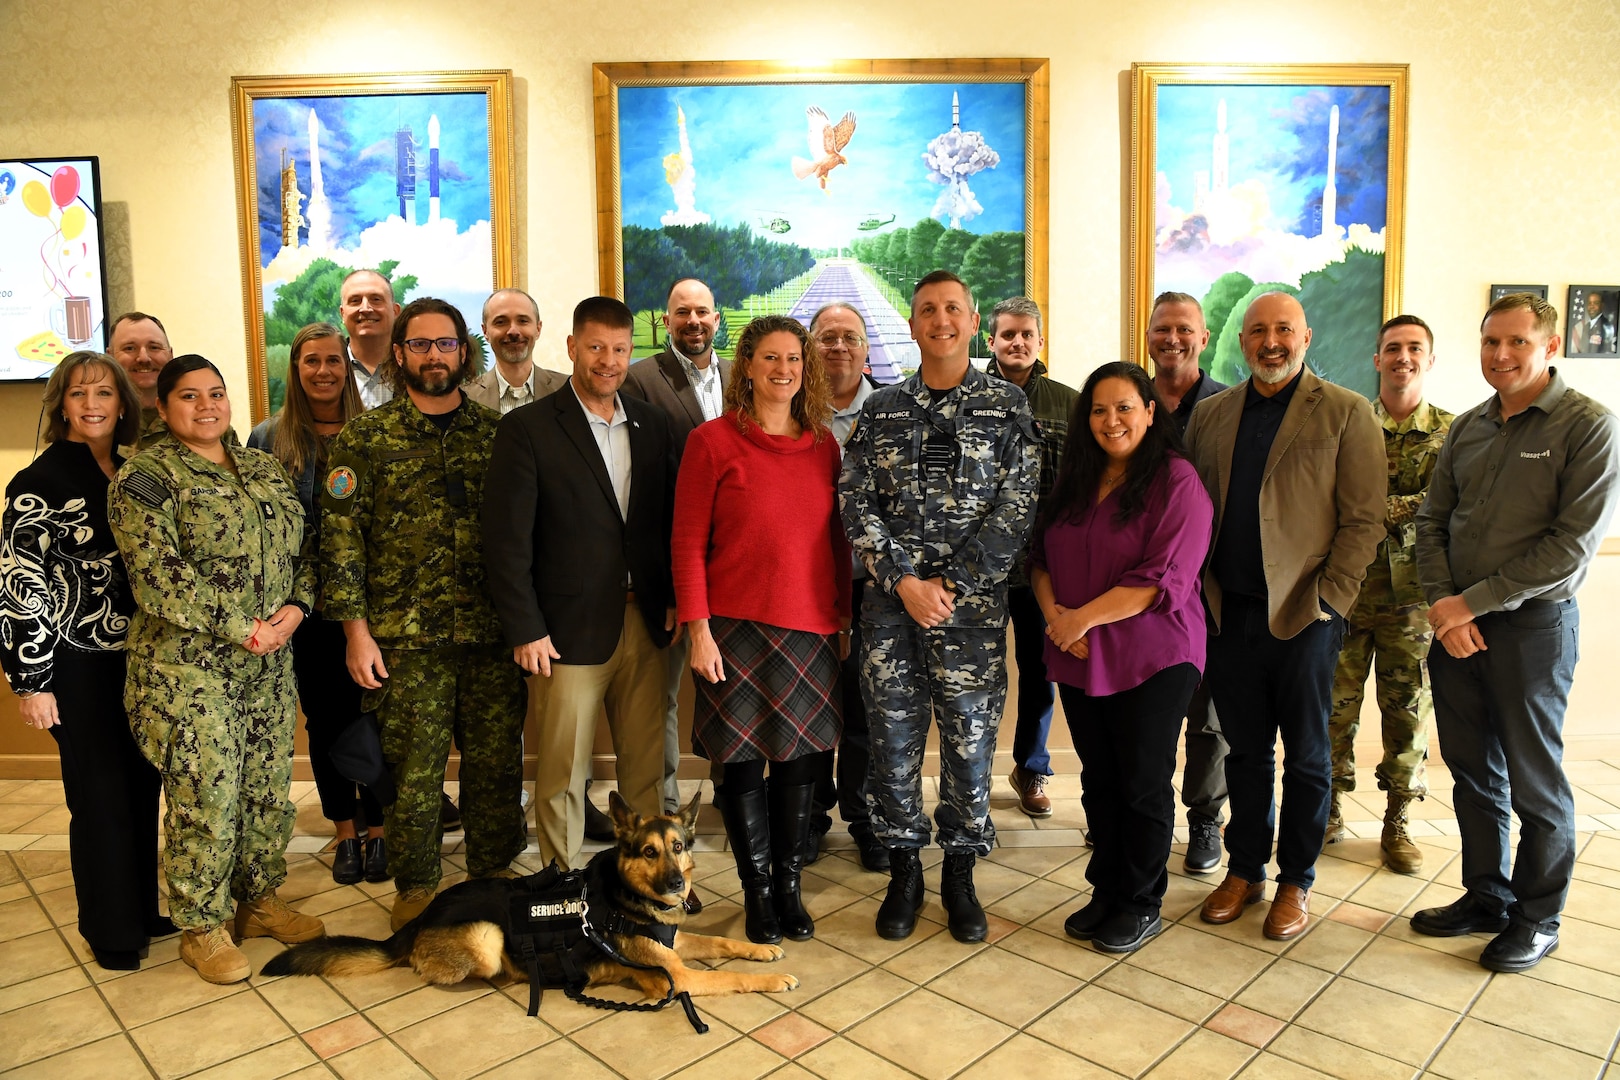 A group of 18 people and one dog stand together for a group photo inside the Pacific Coast Club entryway.